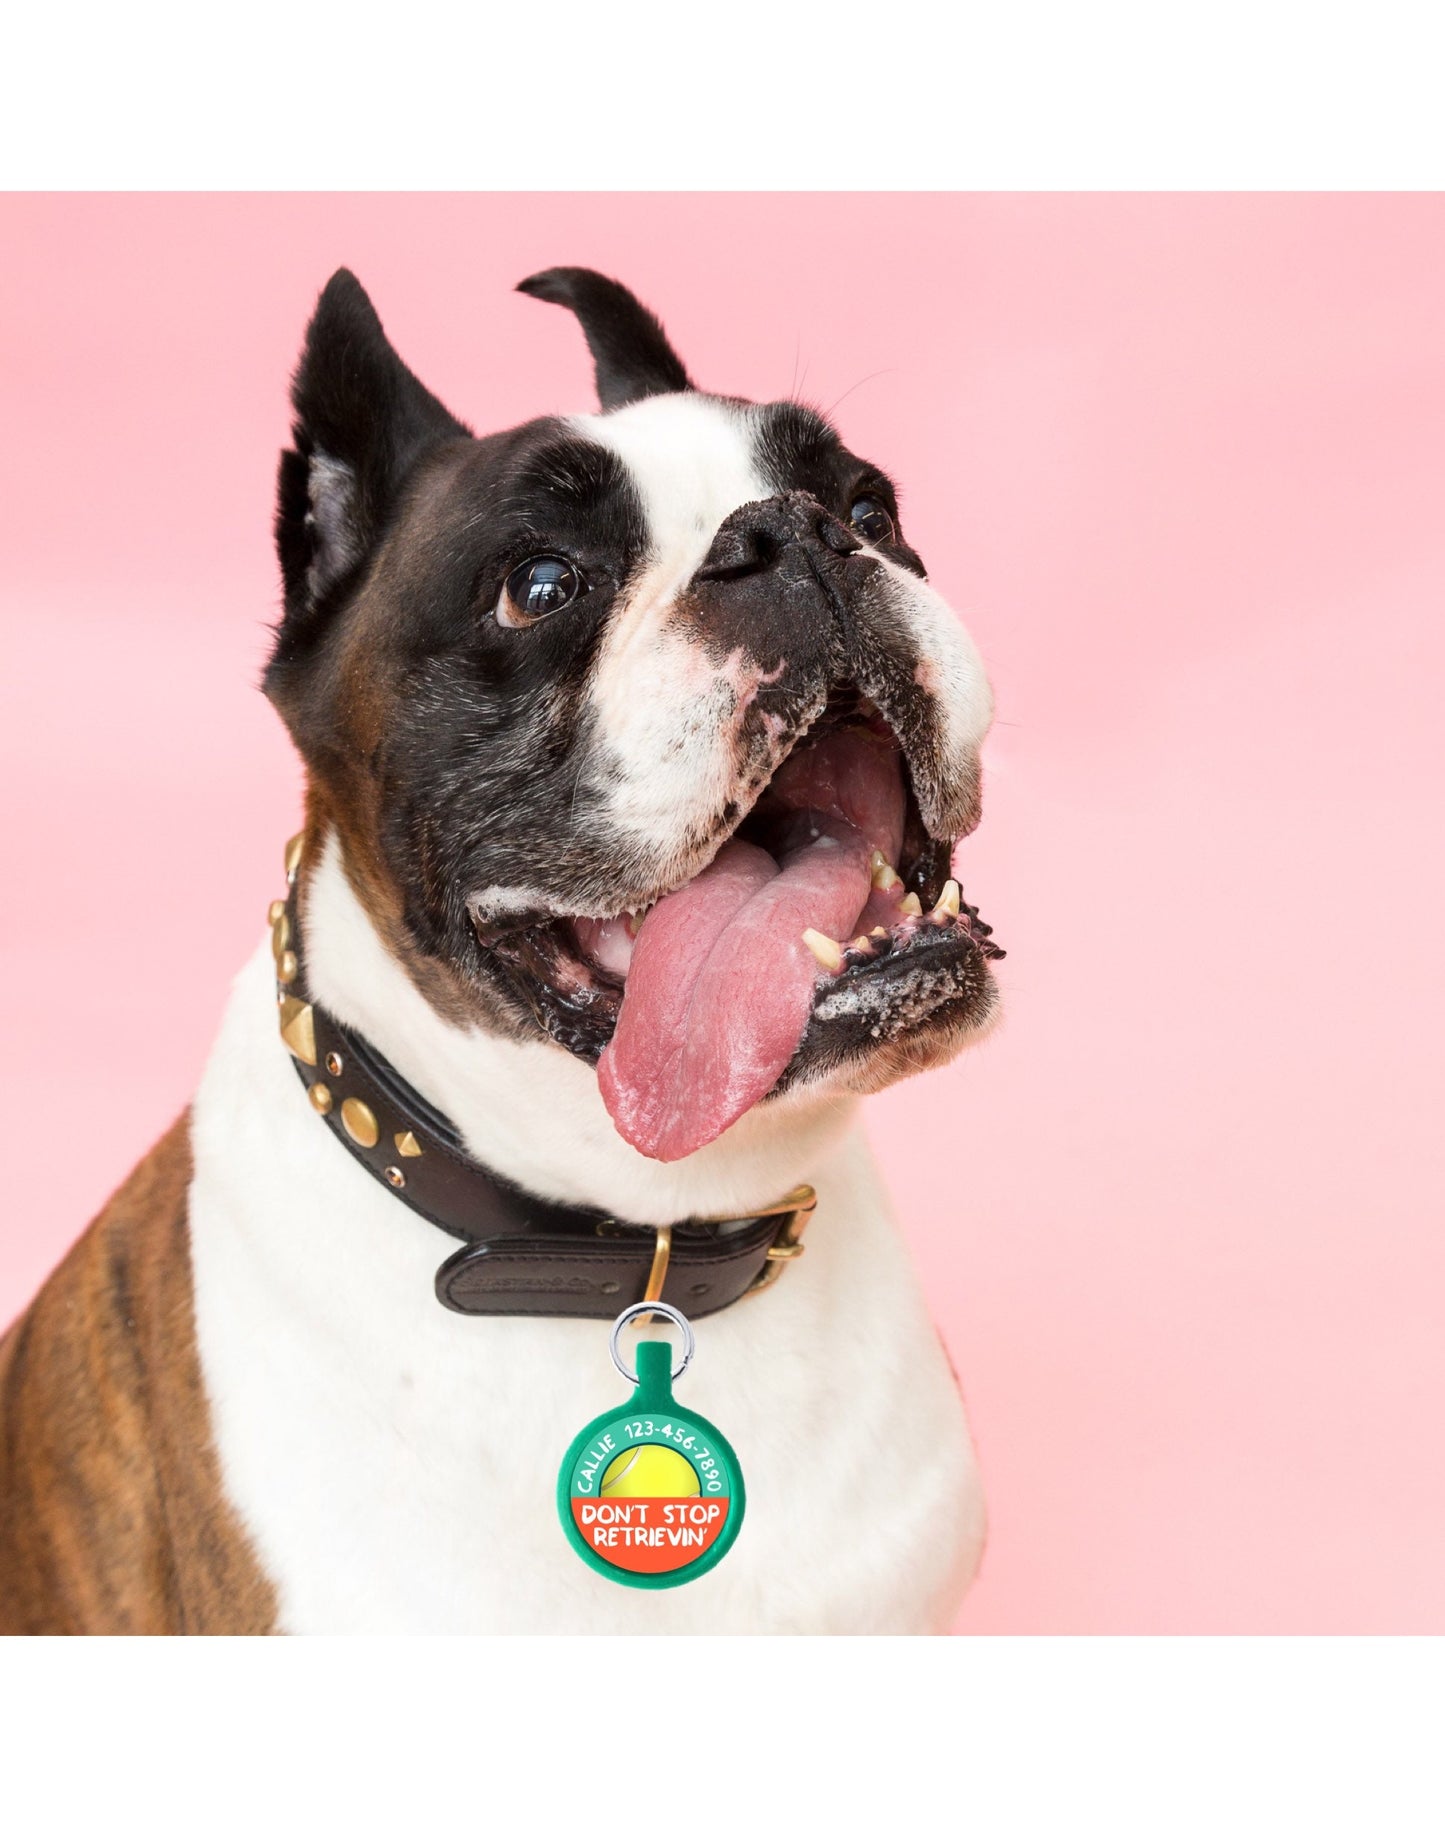 Don't Stop Retrievin' Personalized Dog ID Pet Tag Custom Pet Tag You Choose Tag Size & Colors